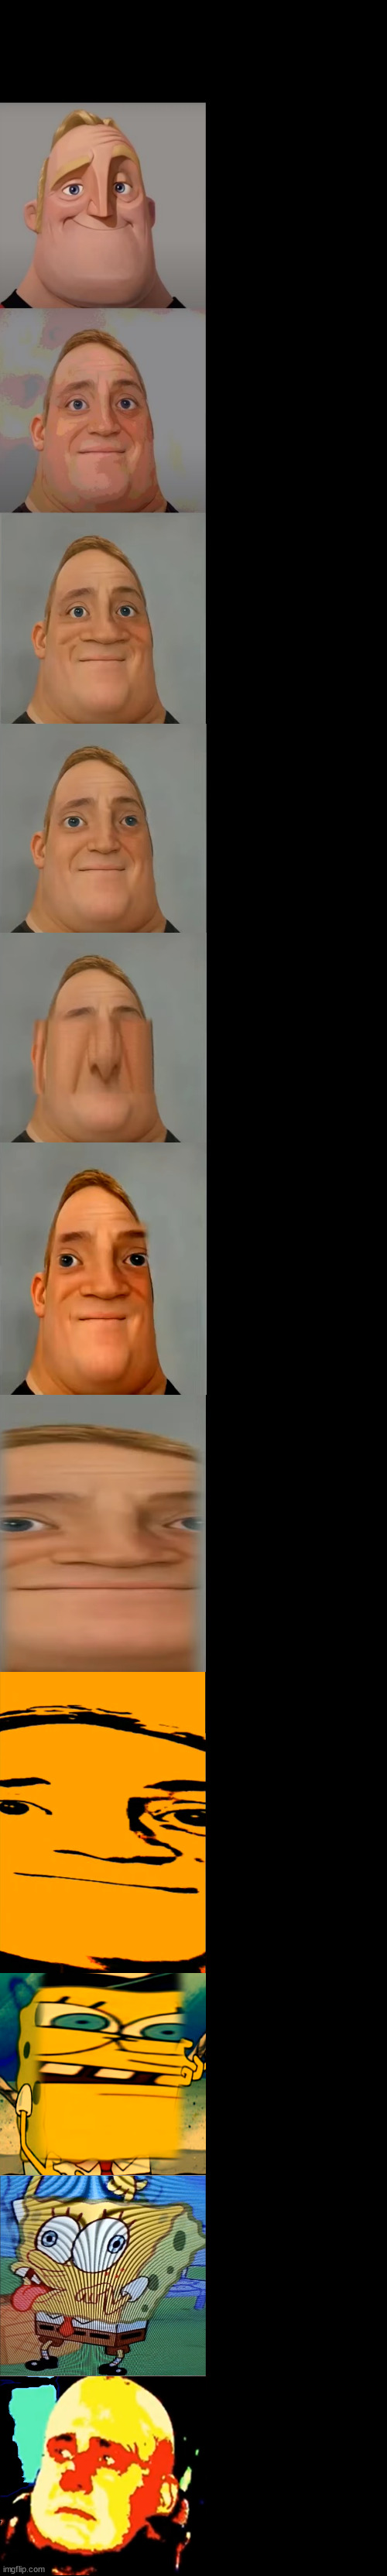 Mr. Incredible Becoming Idiot Extended Blank Meme Template